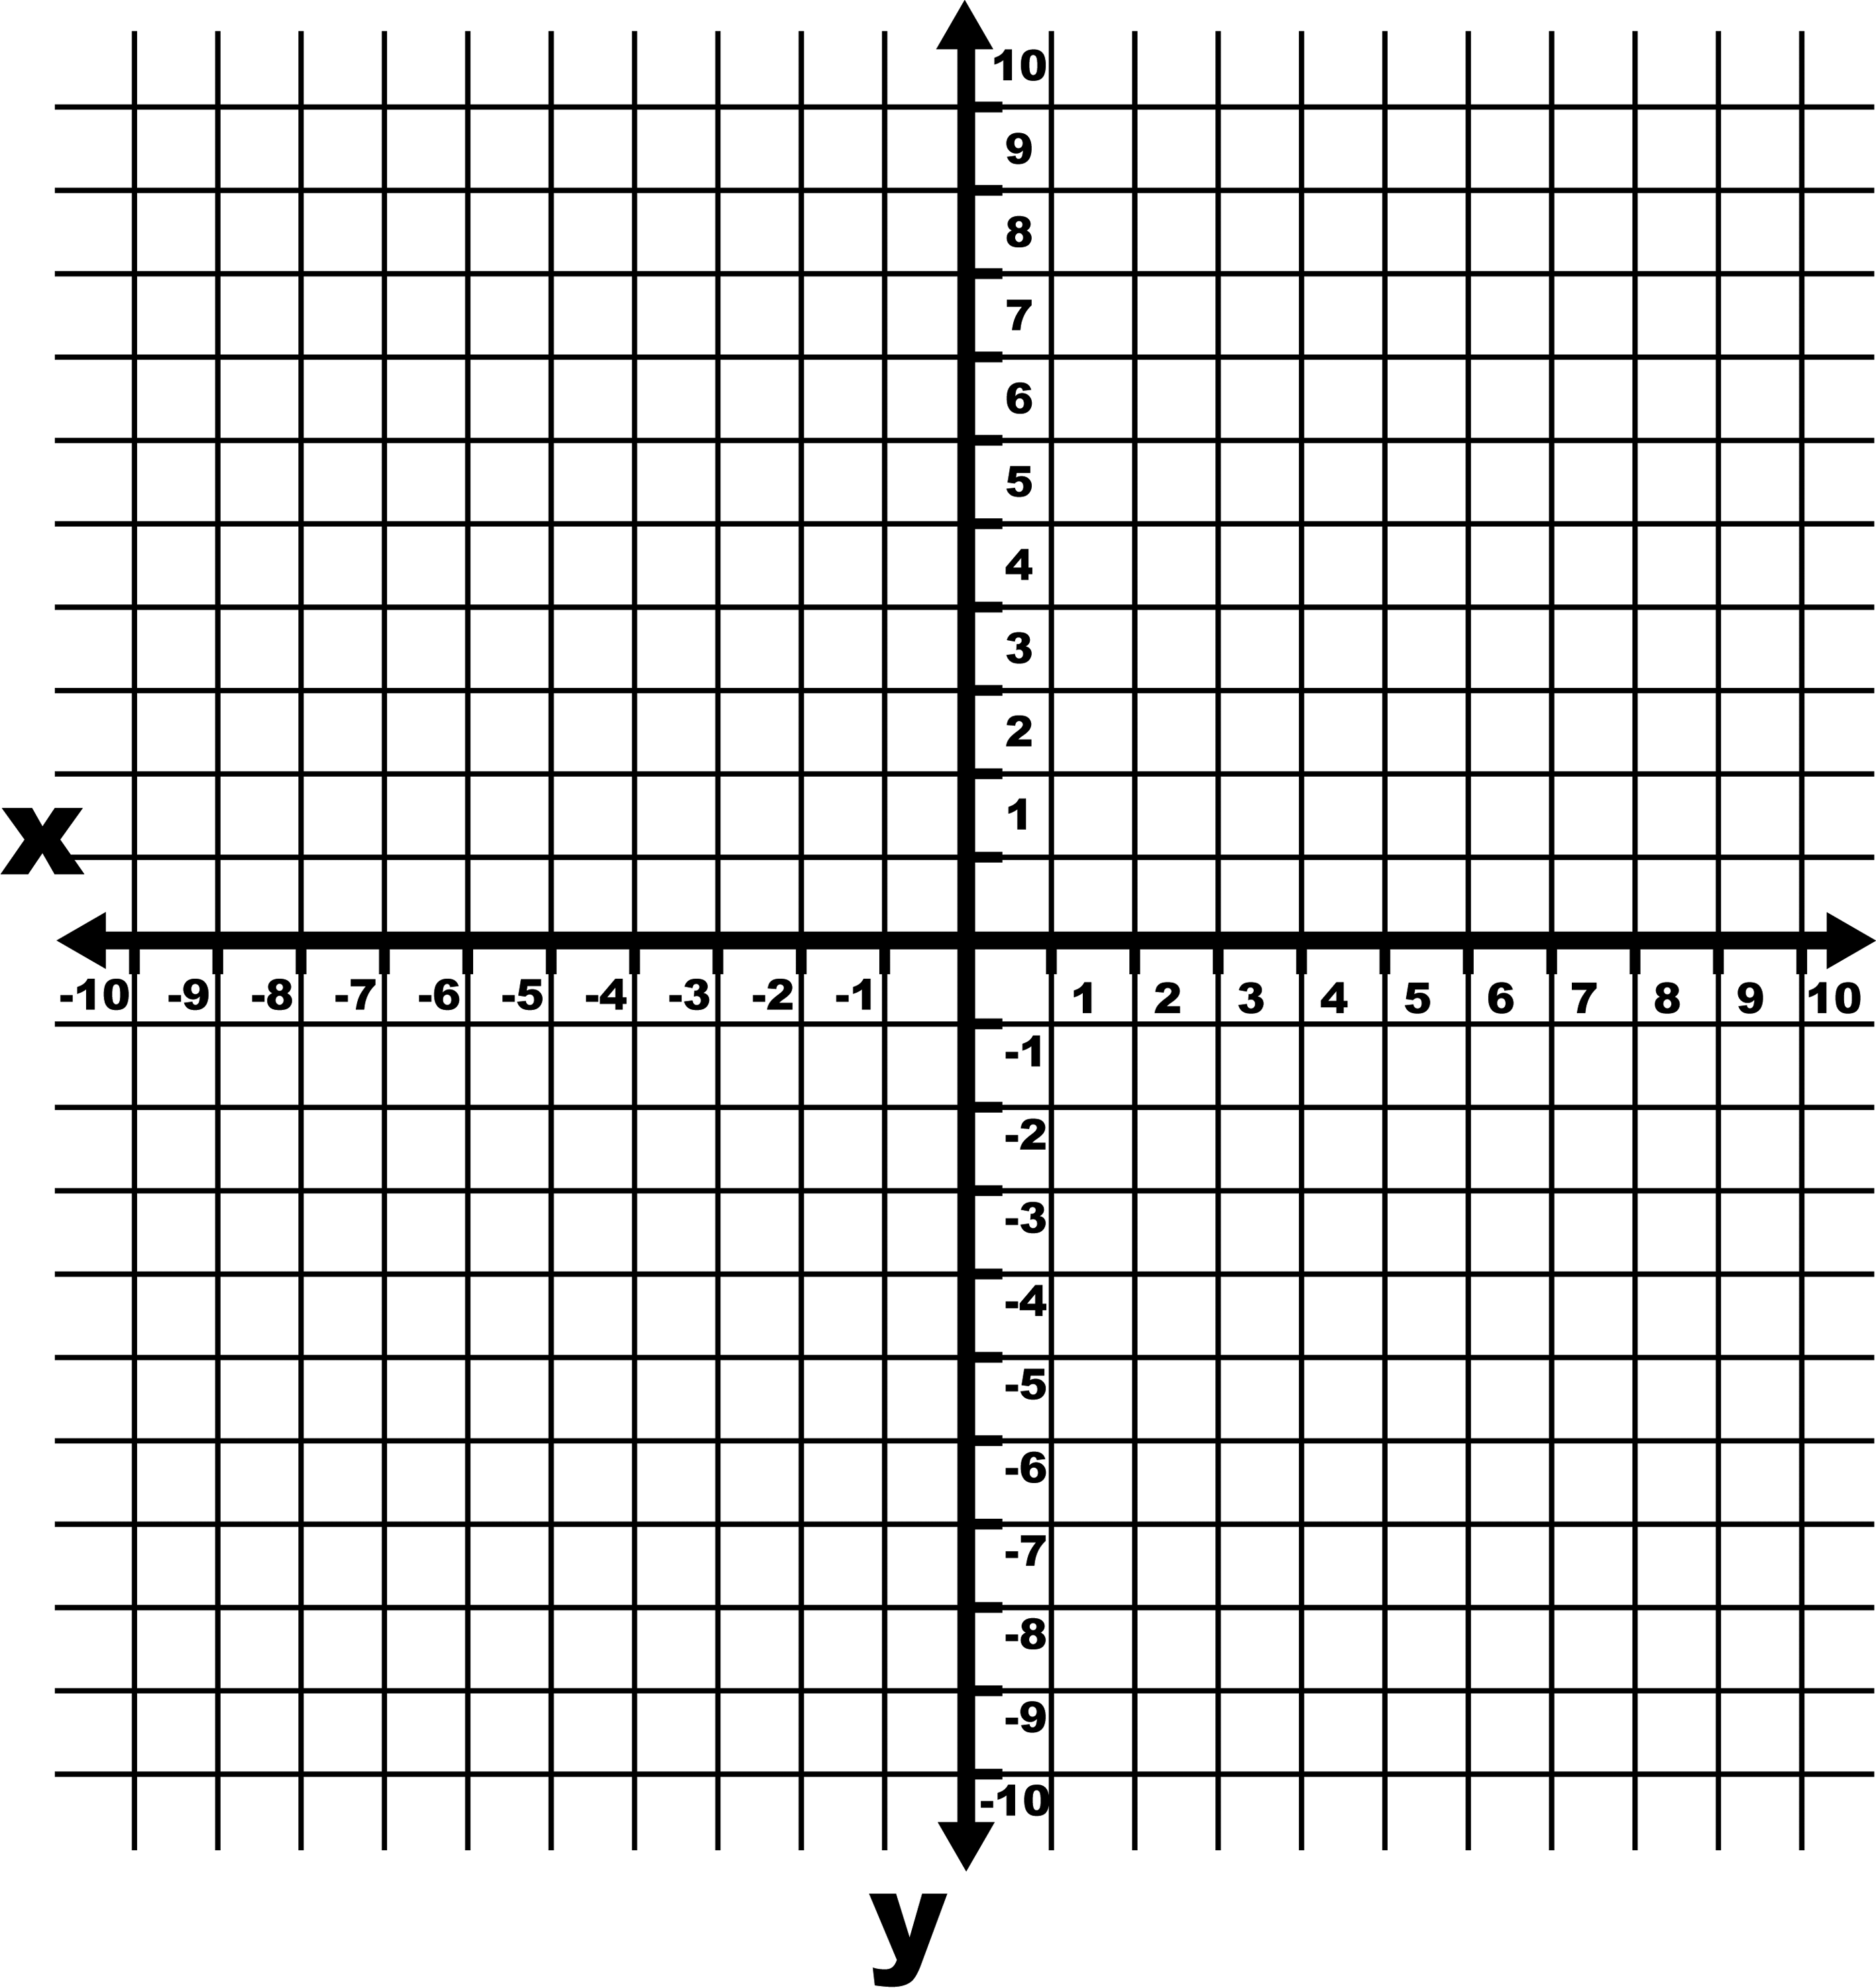 -10 To 10 Coordinate Grid With Increments And Axes Labeled And Grid